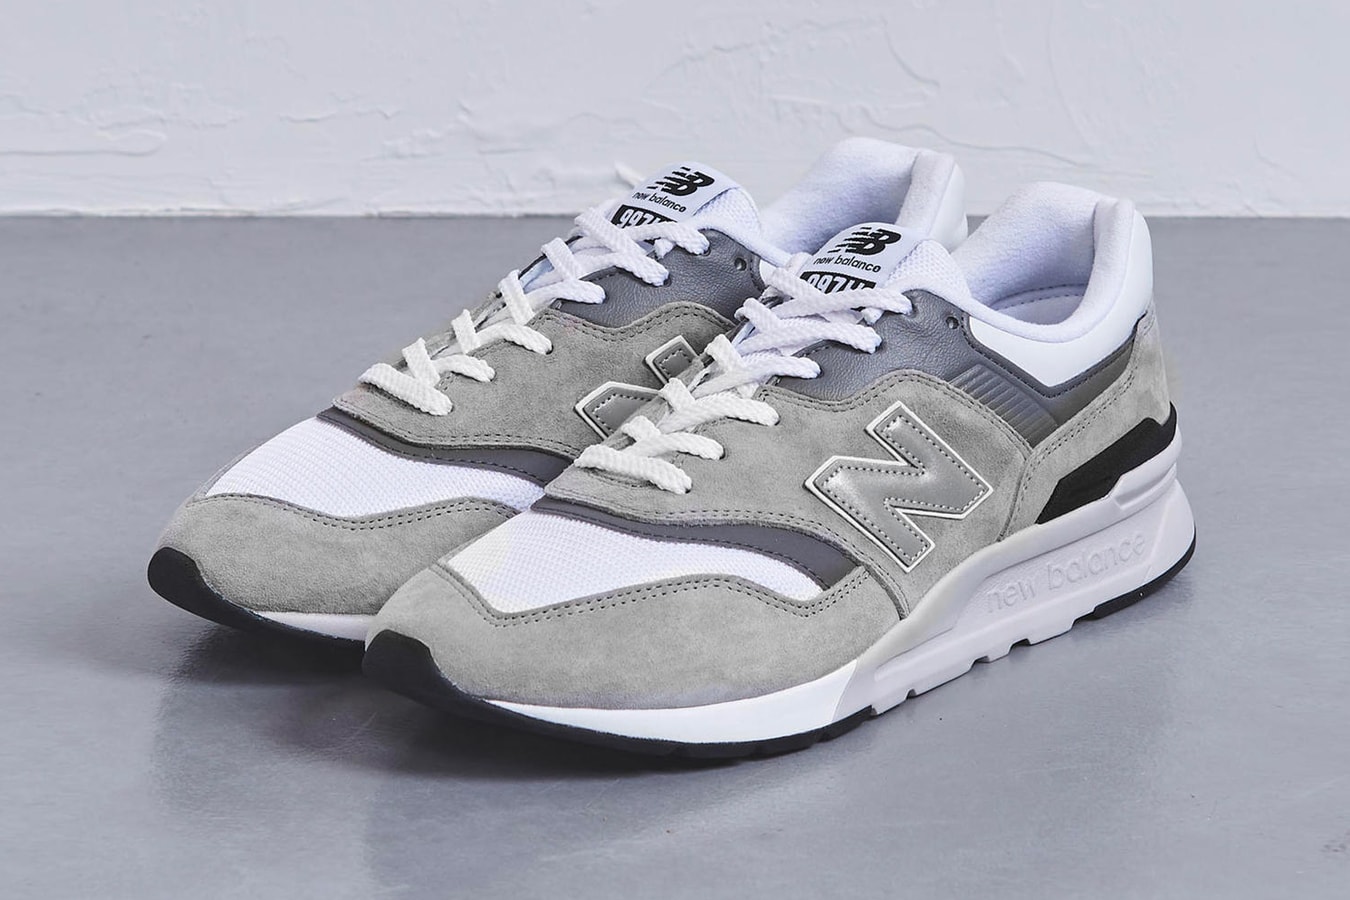 New Balance 997H Receives a United Arrows Upgrade white grey drop release date preorder link images price footwear 